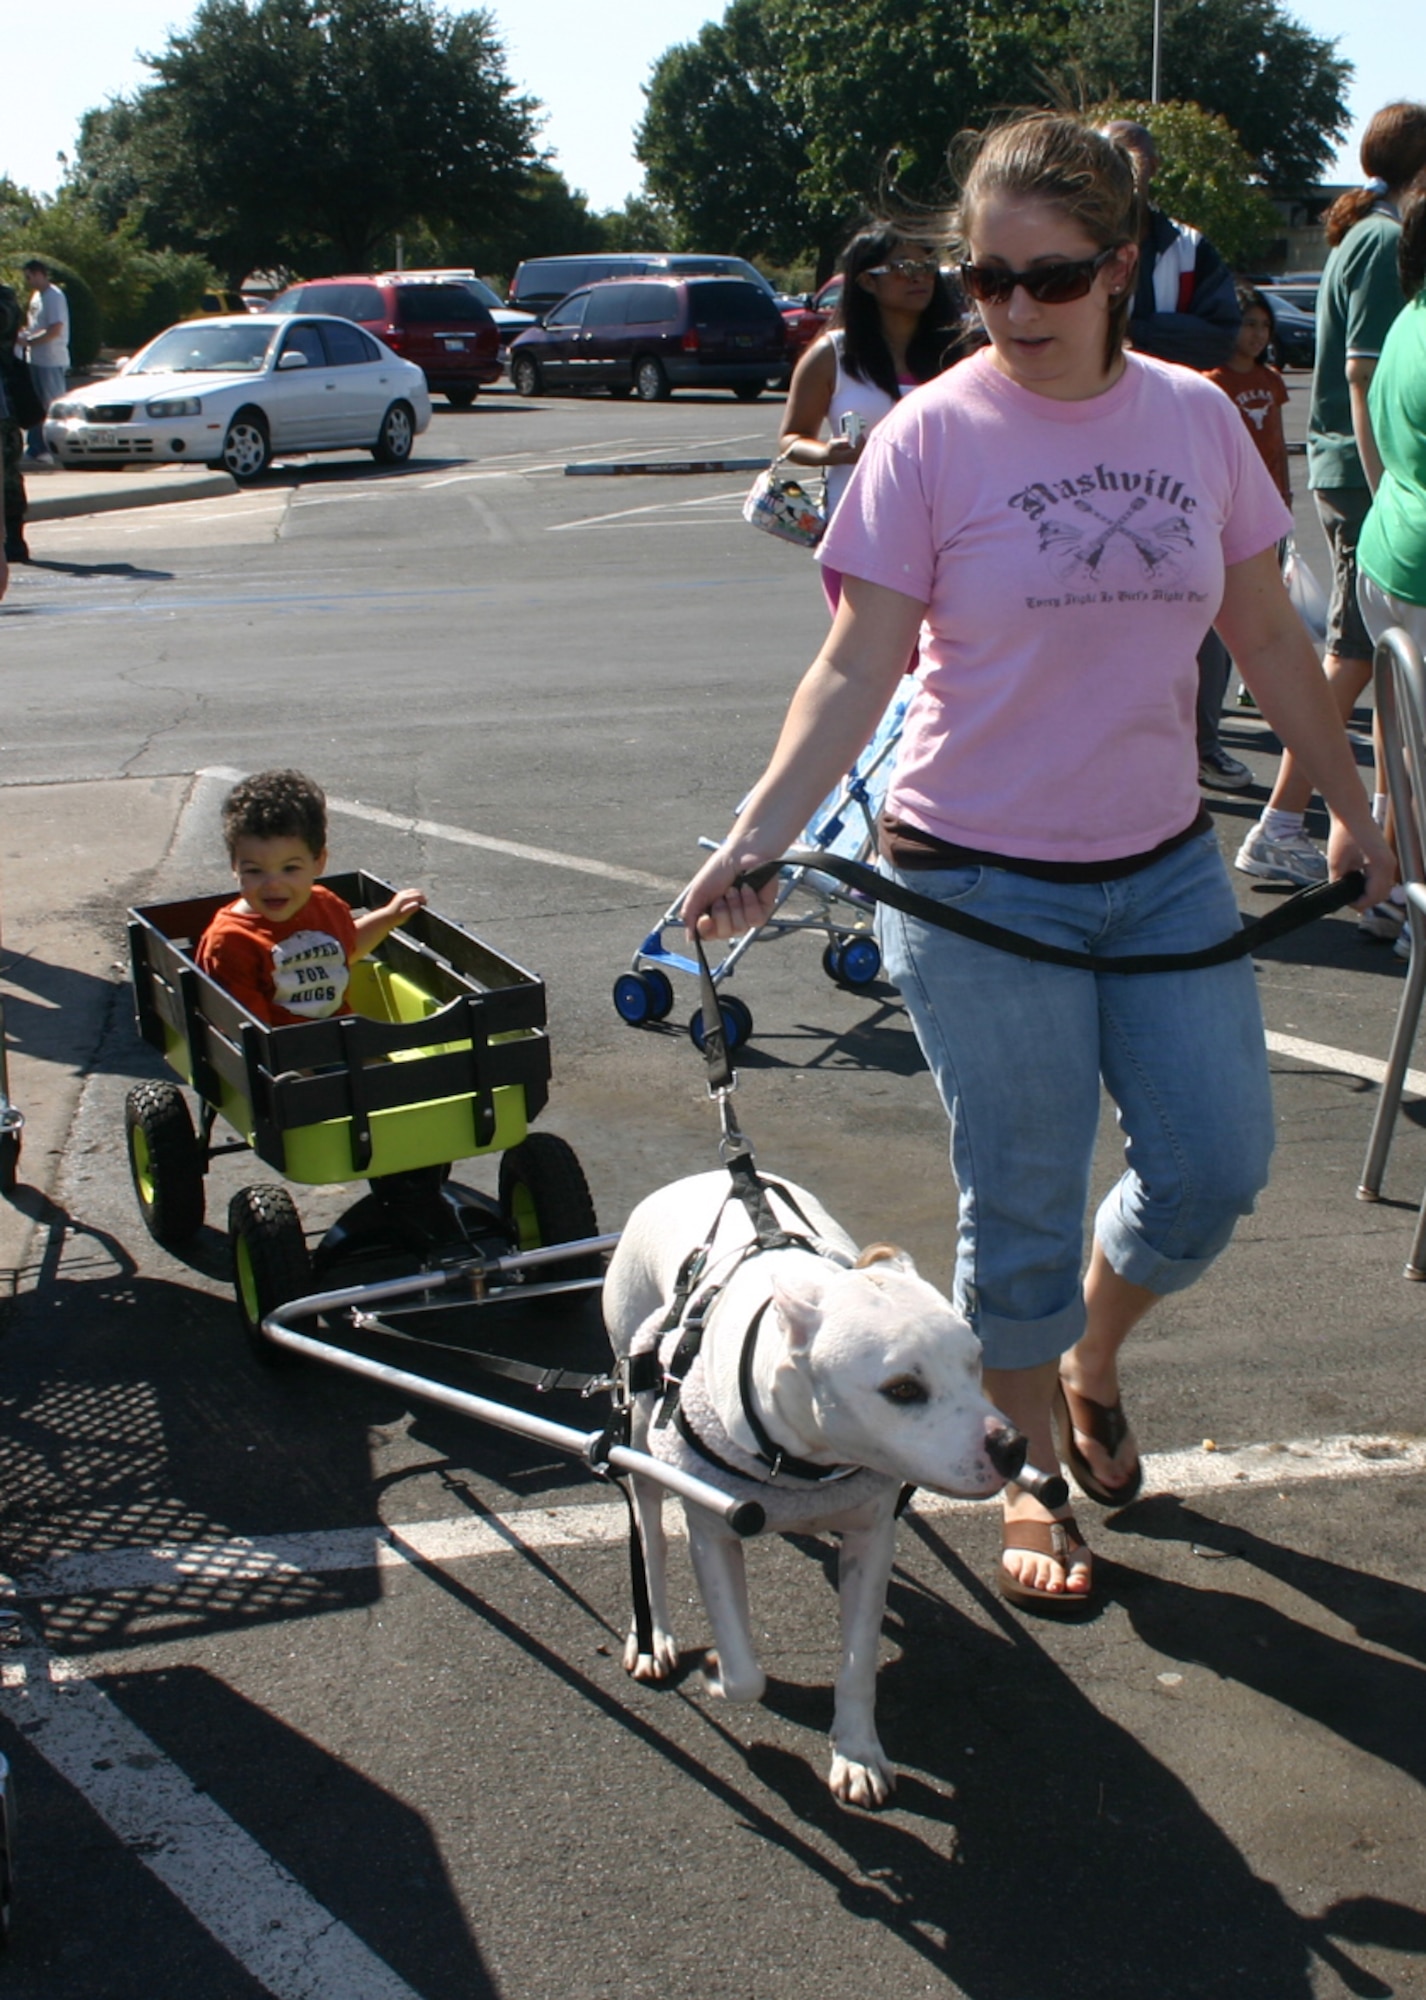 Janine Hawk and her dog Lexey take James Thompson, Jr. for a ride in a pet pull-cart at the Dog Show in the base exchange parking lot Oct. 13.  The cart was designed by Ms. Hawk.  (U.S. Air Force photo/Staff Sgt. Tonnette Thompson)